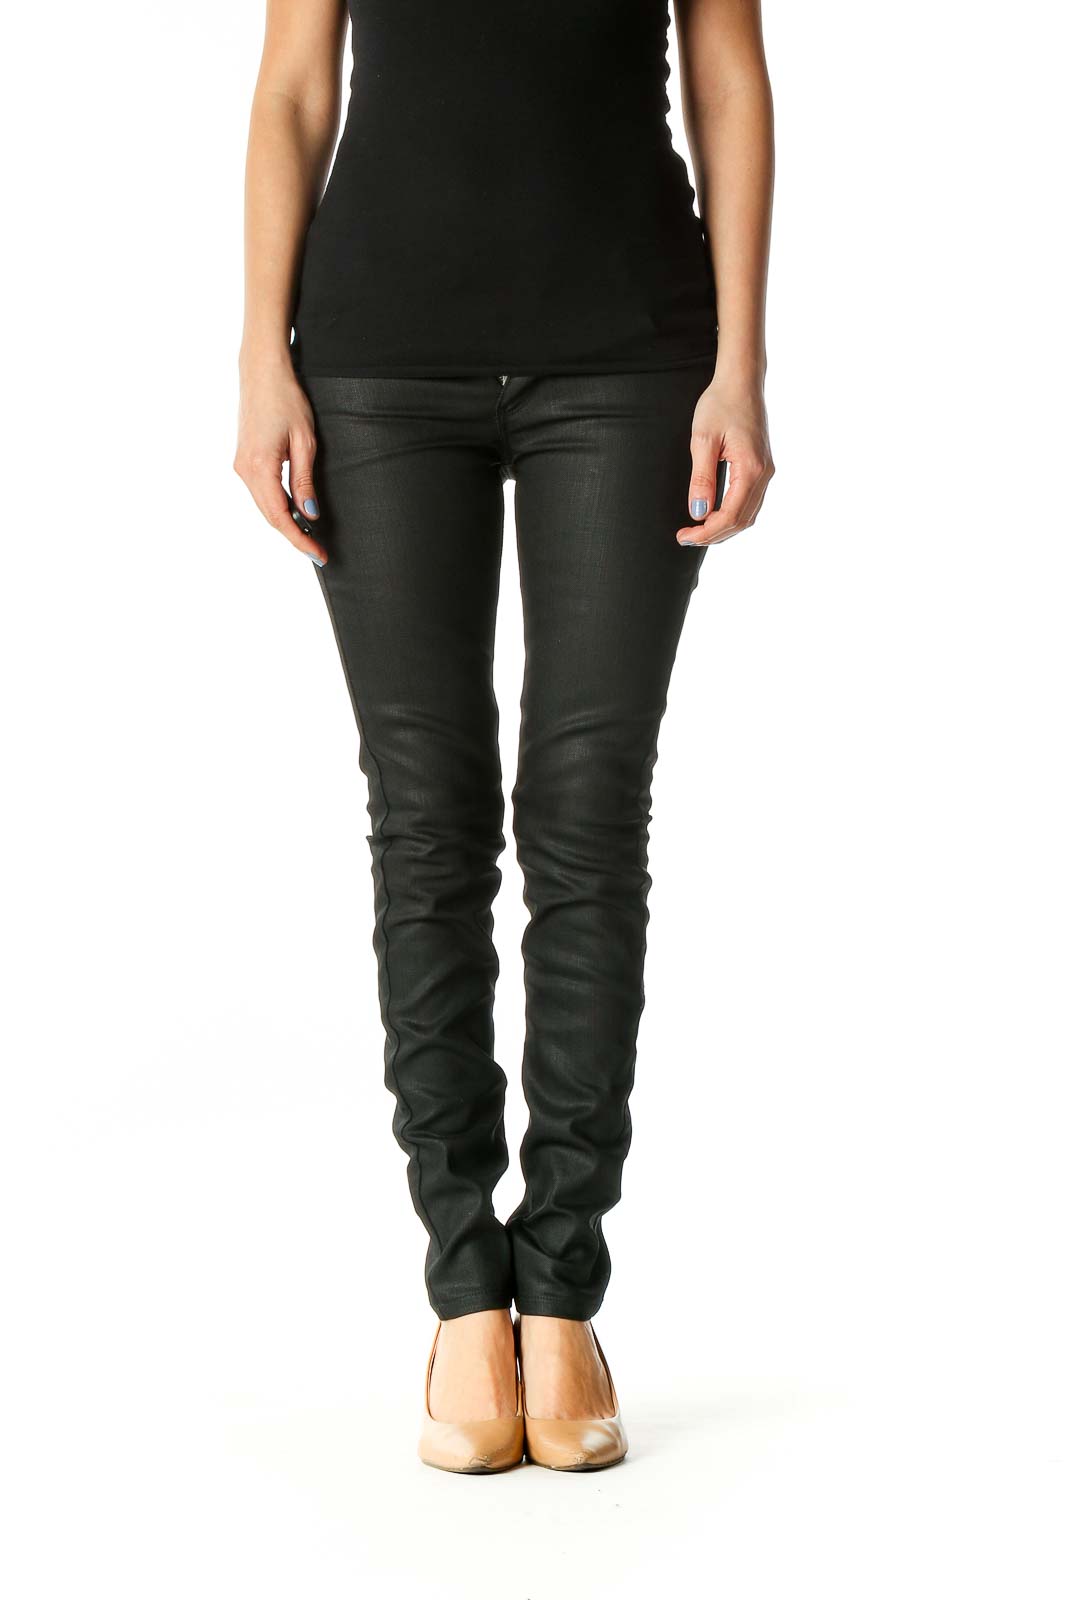 Black Casual Skinny Jeans Front